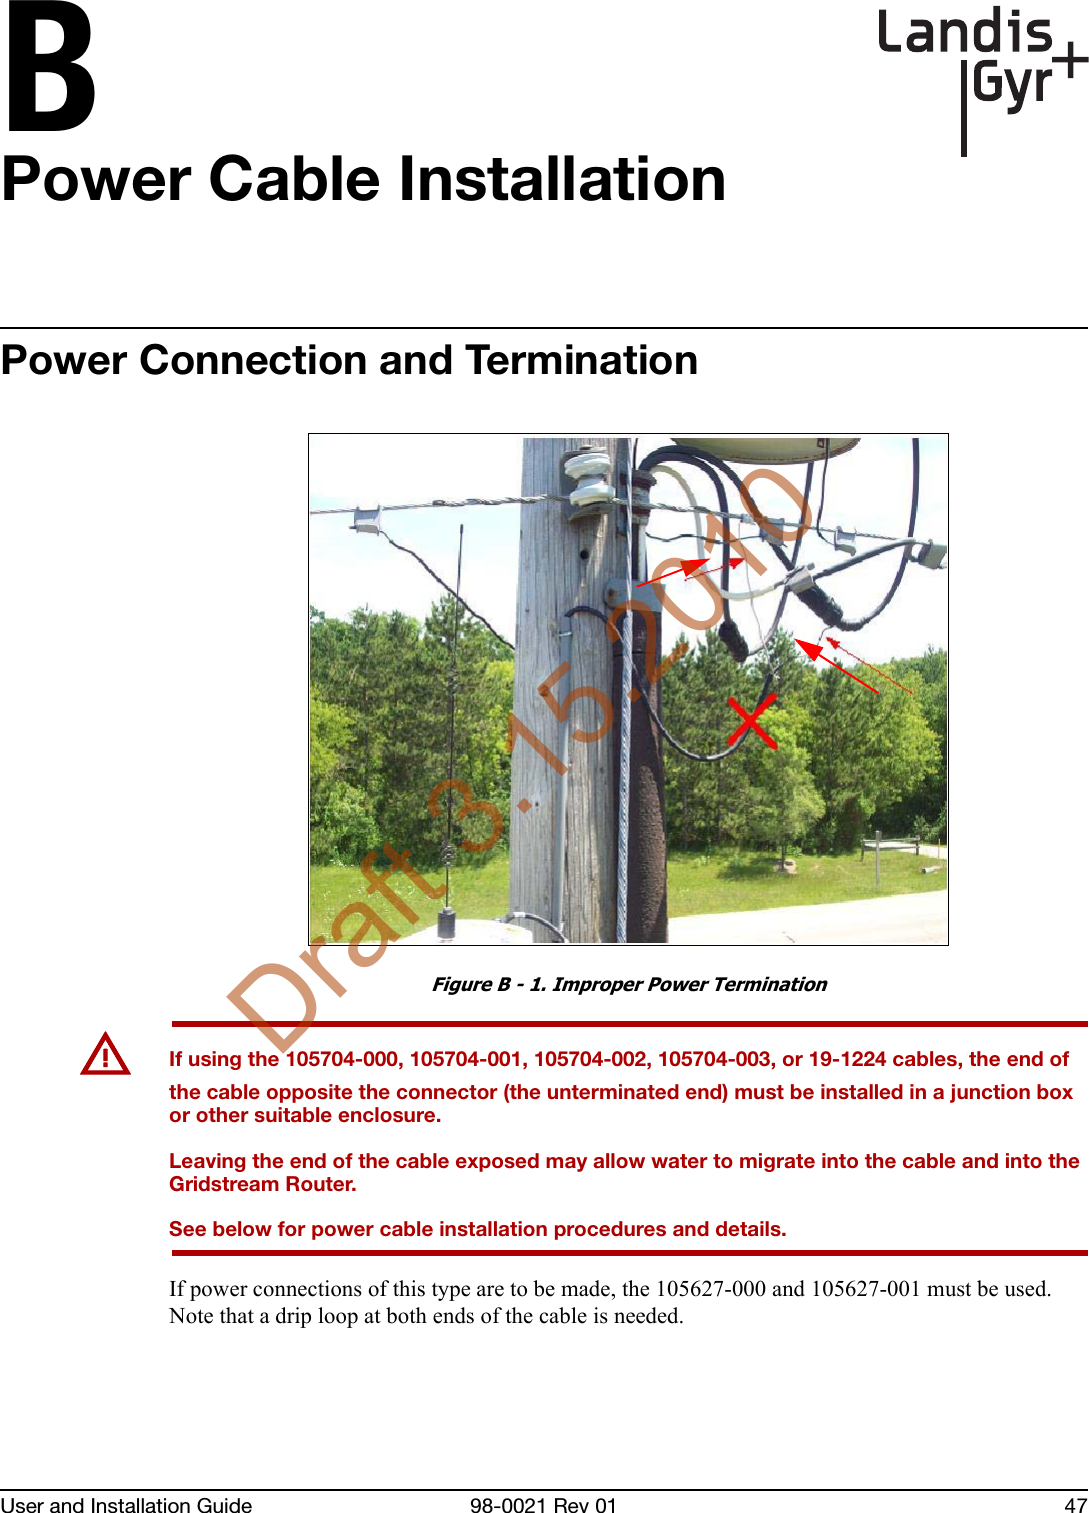 BUser and Installation Guide 98-0021 Rev 01 47Power Cable InstallationPower Connection and TerminationFigure B - 1. Improper Power TerminationUIf using the 105704-000, 105704-001, 105704-002, 105704-003, or 19-1224 cables, the end of the cable opposite the connector (the unterminated end) must be installed in a junction box or other suitable enclosure.Leaving the end of the cable exposed may allow water to migrate into the cable and into the Gridstream Router.See below for power cable installation procedures and details.If power connections of this type are to be made, the 105627-000 and 105627-001 must be used. Note that a drip loop at both ends of the cable is needed. Draft 3.15.2010